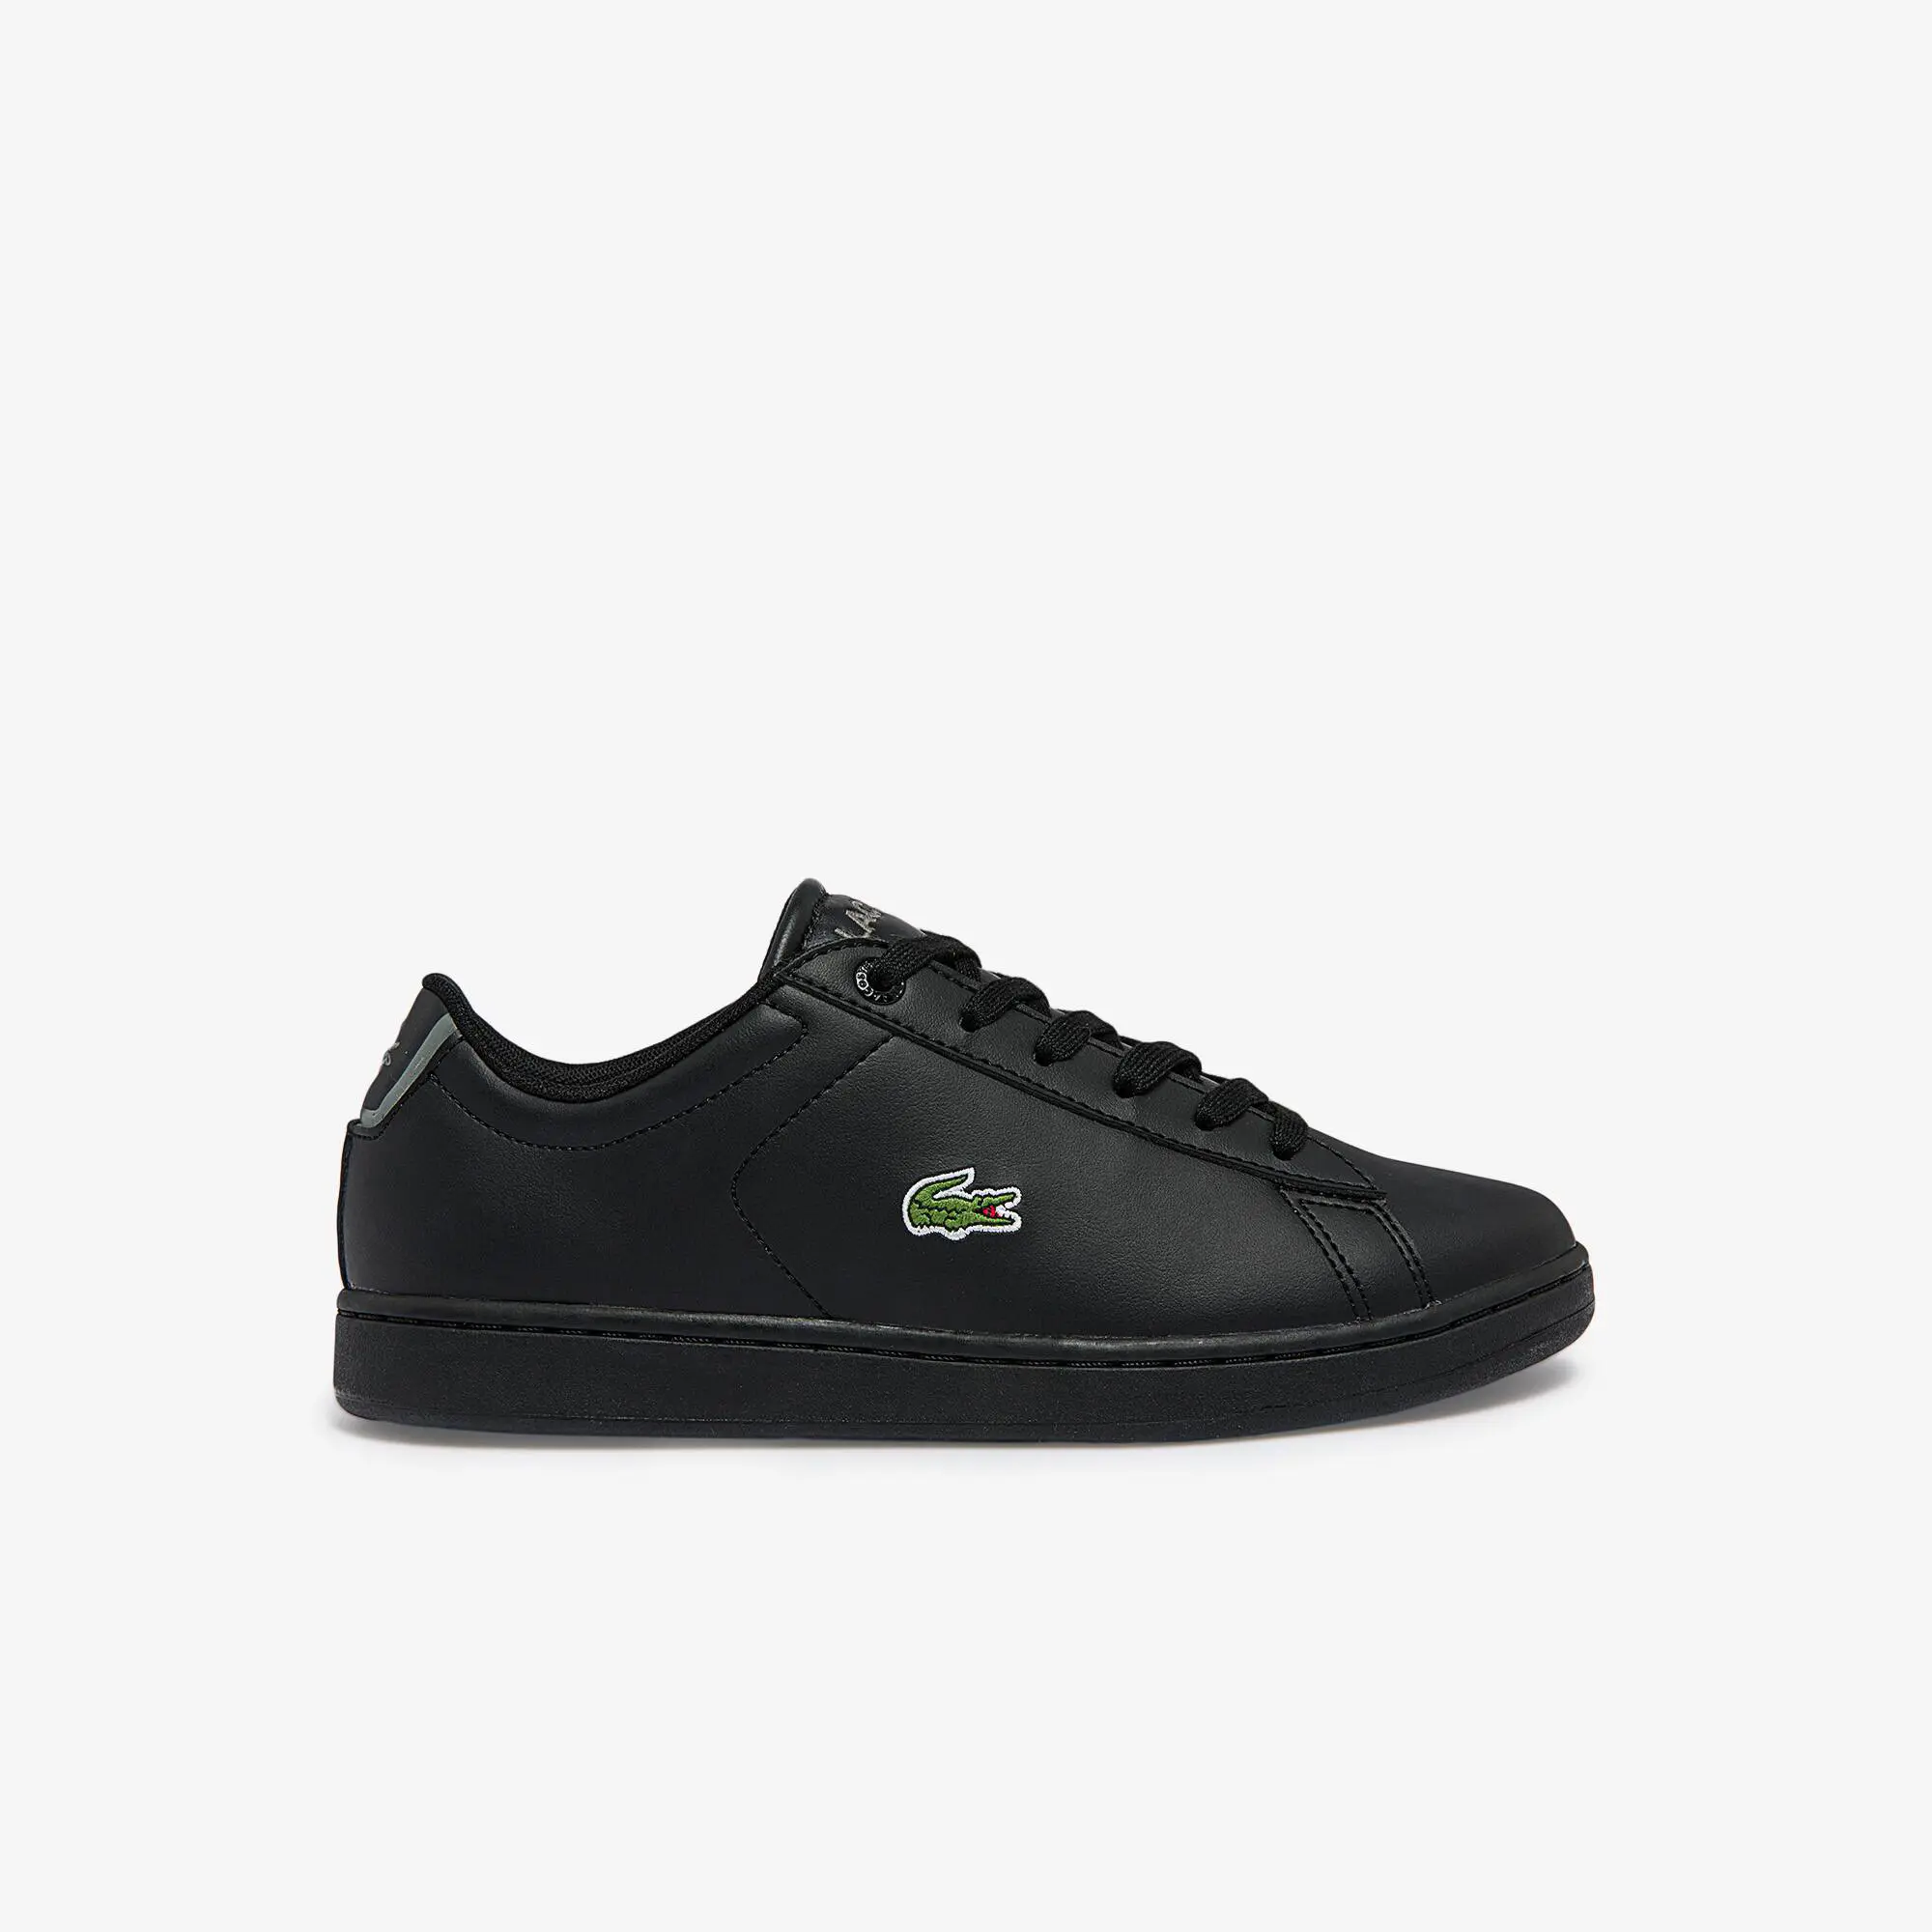 Lacoste Juniors' Carnaby Evo BL Synthetic Trainers. 1